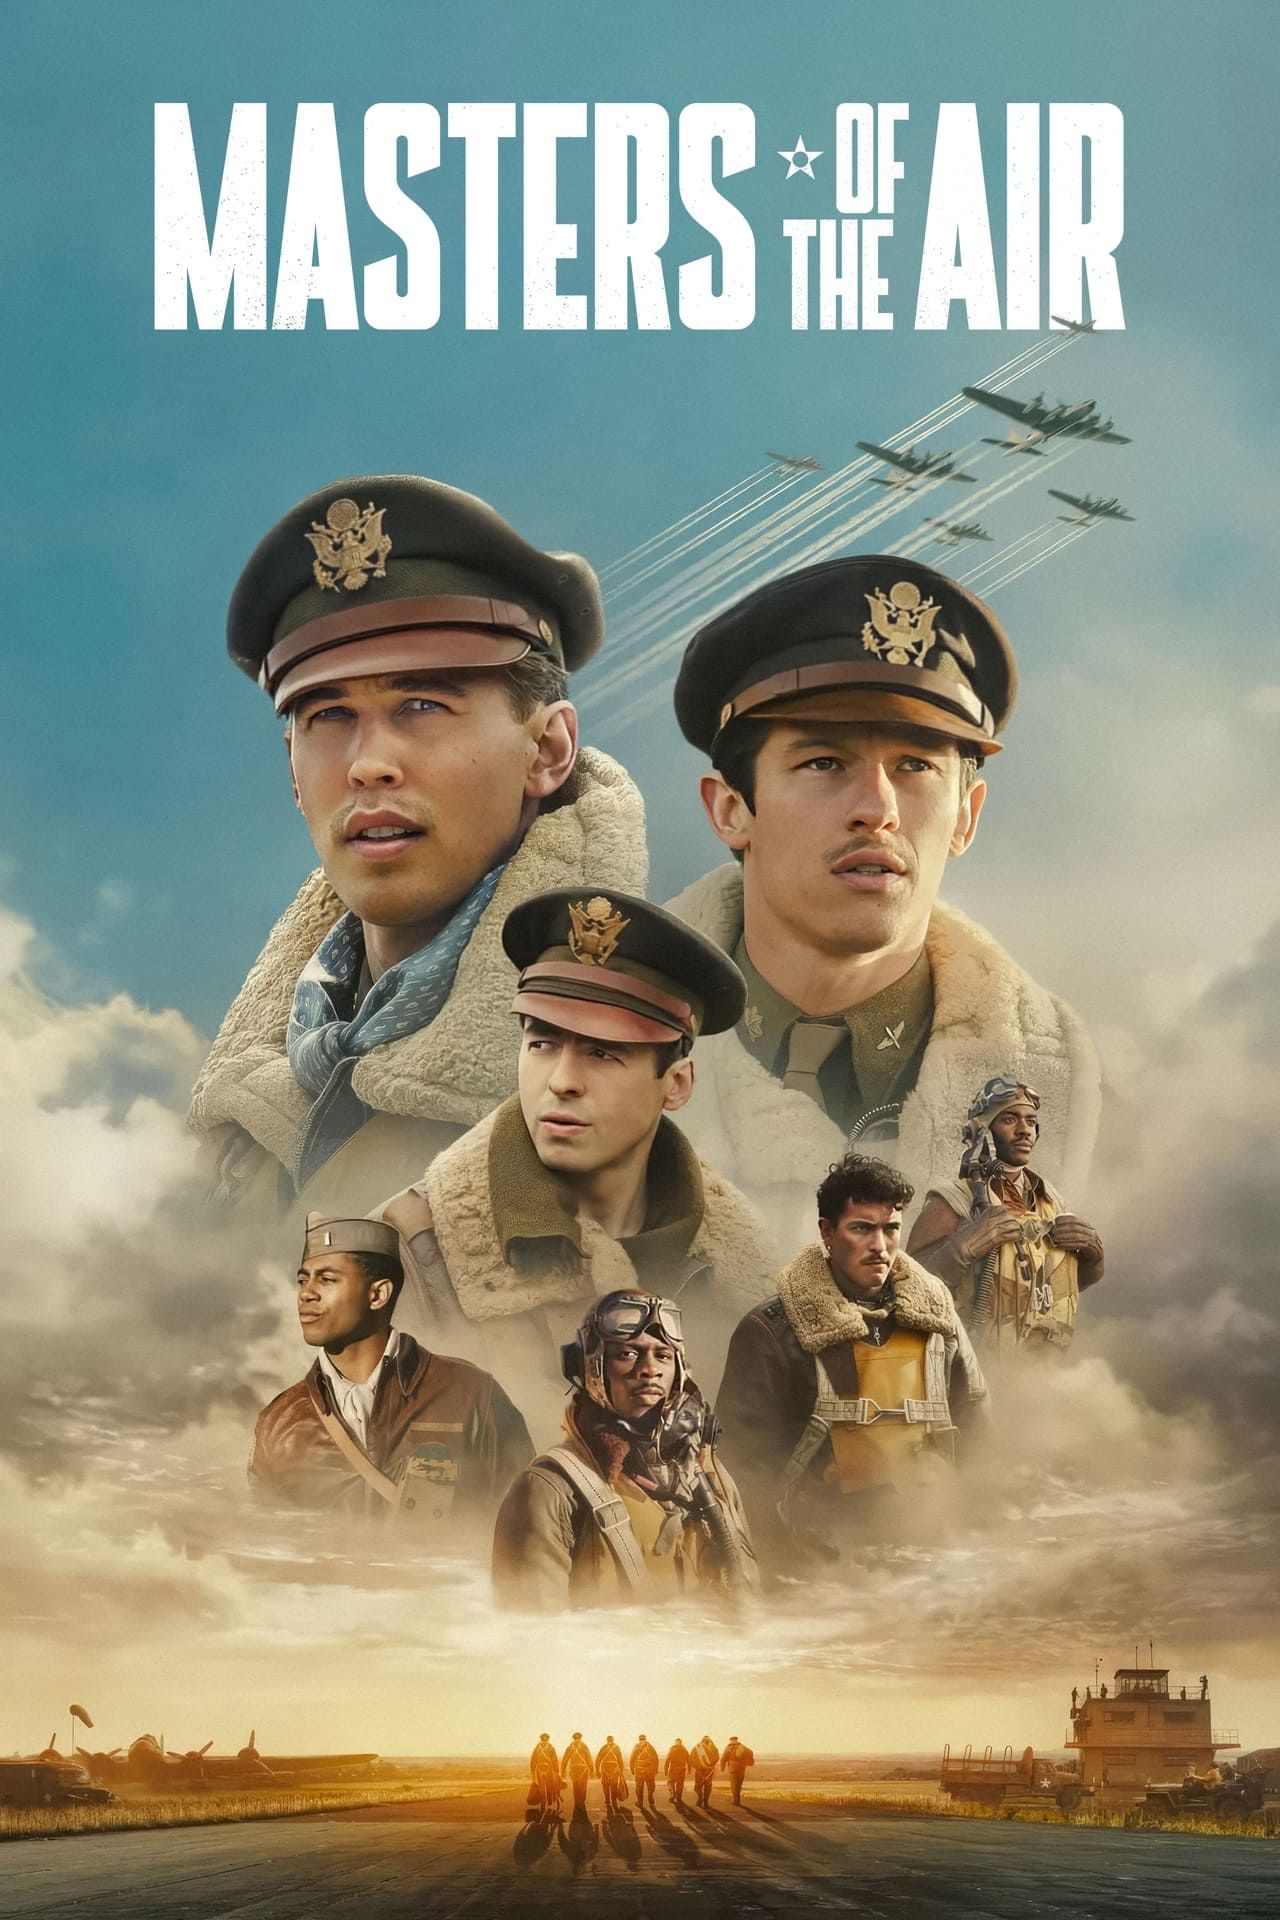 Poster for the Masters of the Air TV show featuring Austin Butler and several air pilots in World War II uniform